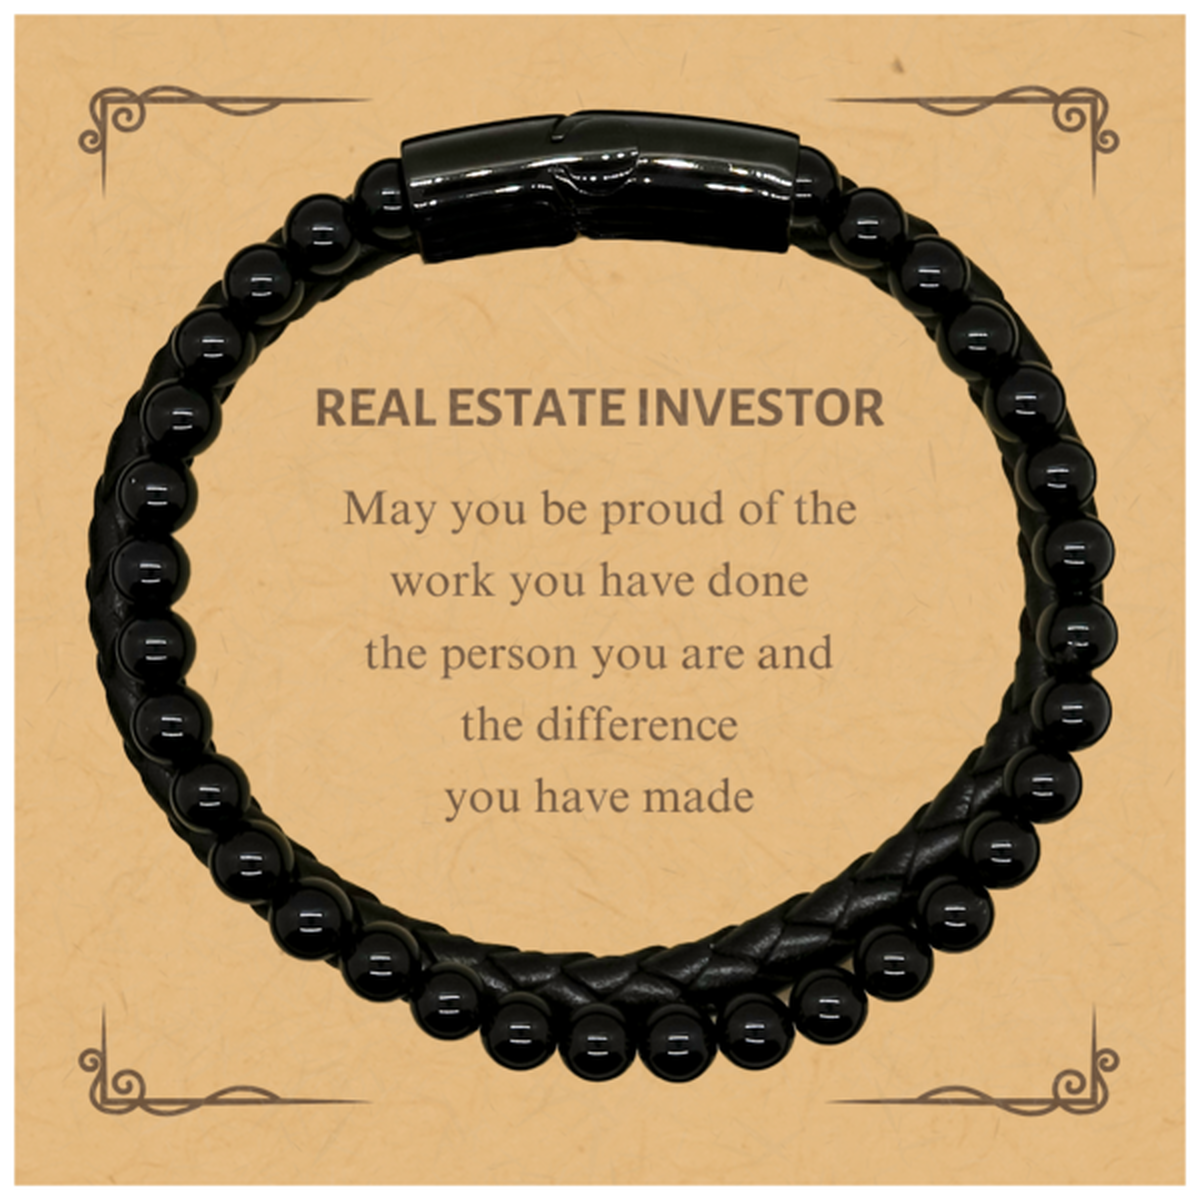 Real Estate Investor May you be proud of the work you have done, Retirement Real Estate Investor Stone Leather Bracelets for Colleague Appreciation Gifts Amazing for Real Estate Investor